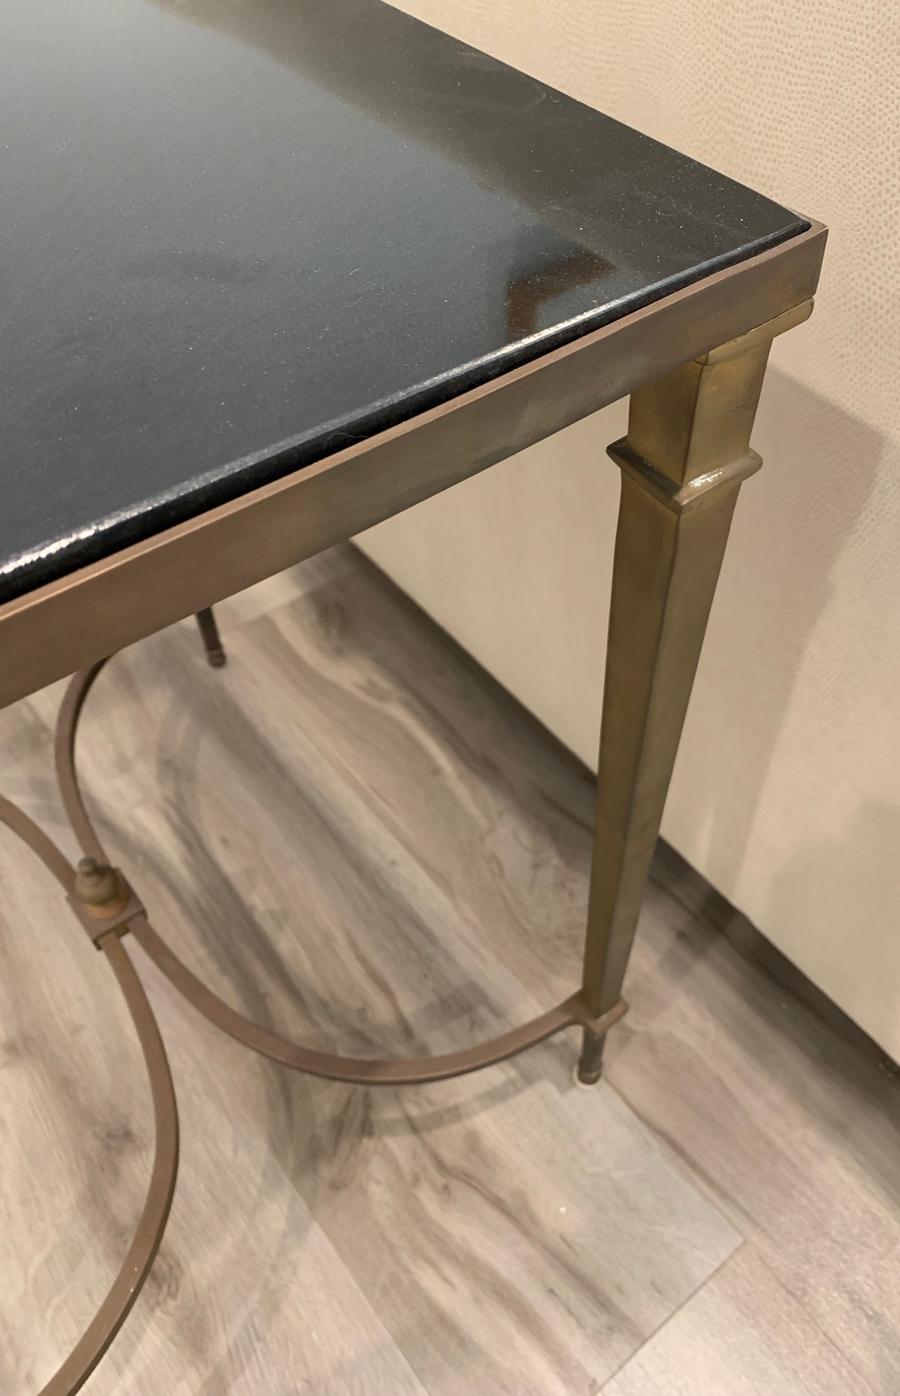 Beautiful table with bronze frame and a slate top, excellent condition, the top was dusty when the images were taken, the table is clean and in very good condition.

Measurements:
19.5 inches wide x 15.5 inches deep x 22 1/2 inches high.
 